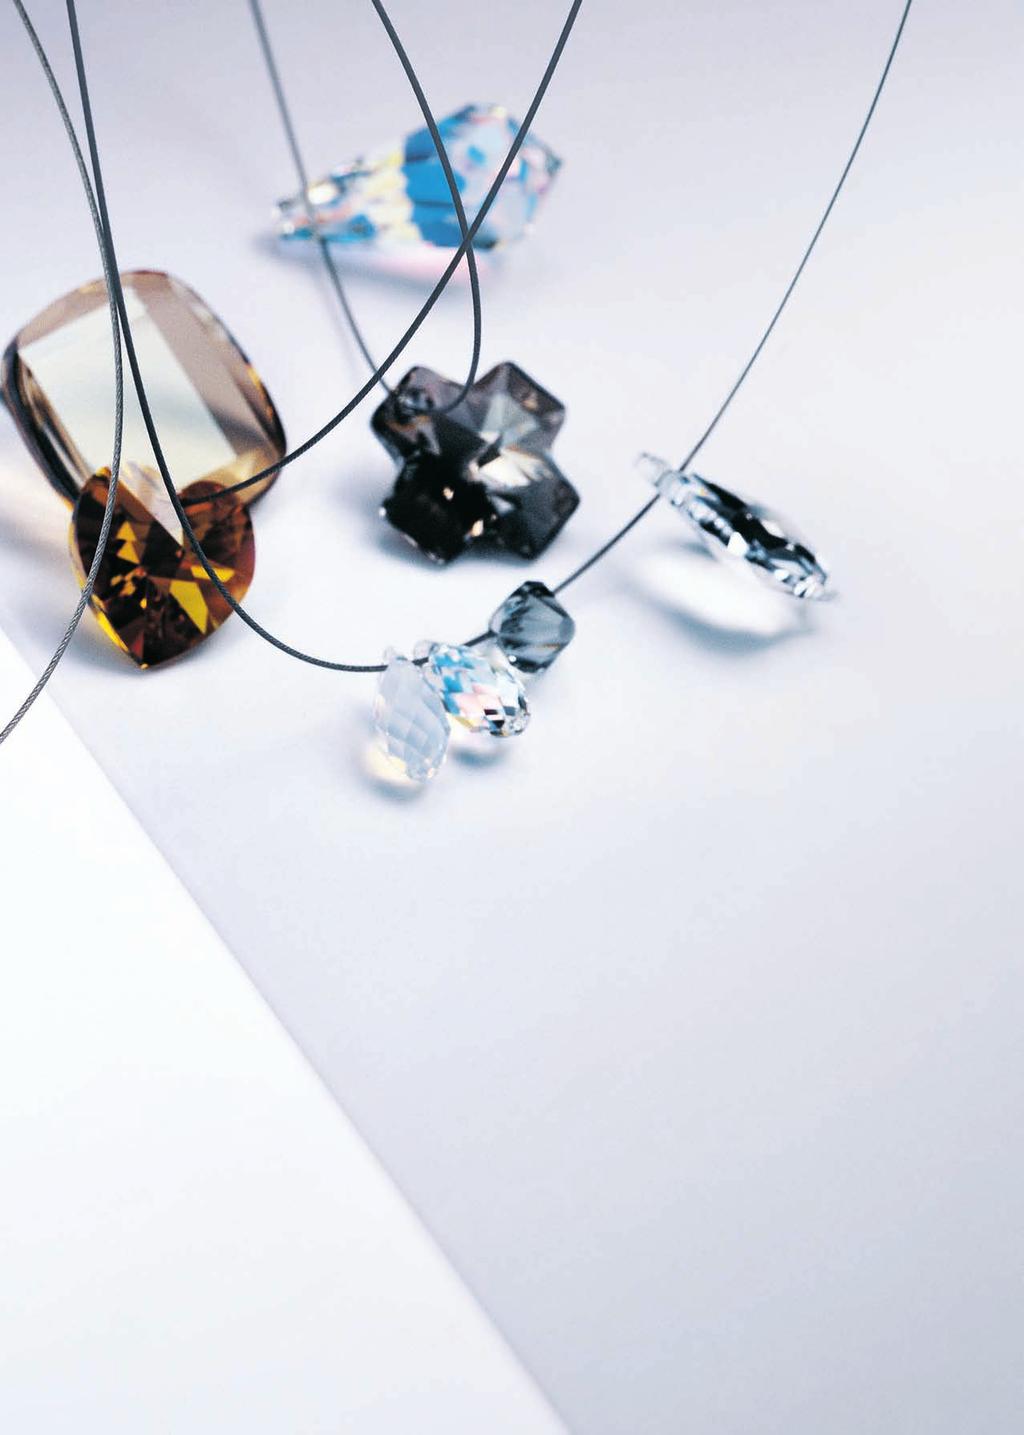 Swarovski with their timeless elegance are available in a large range of shapes and colors and offer many different application possibilities and design